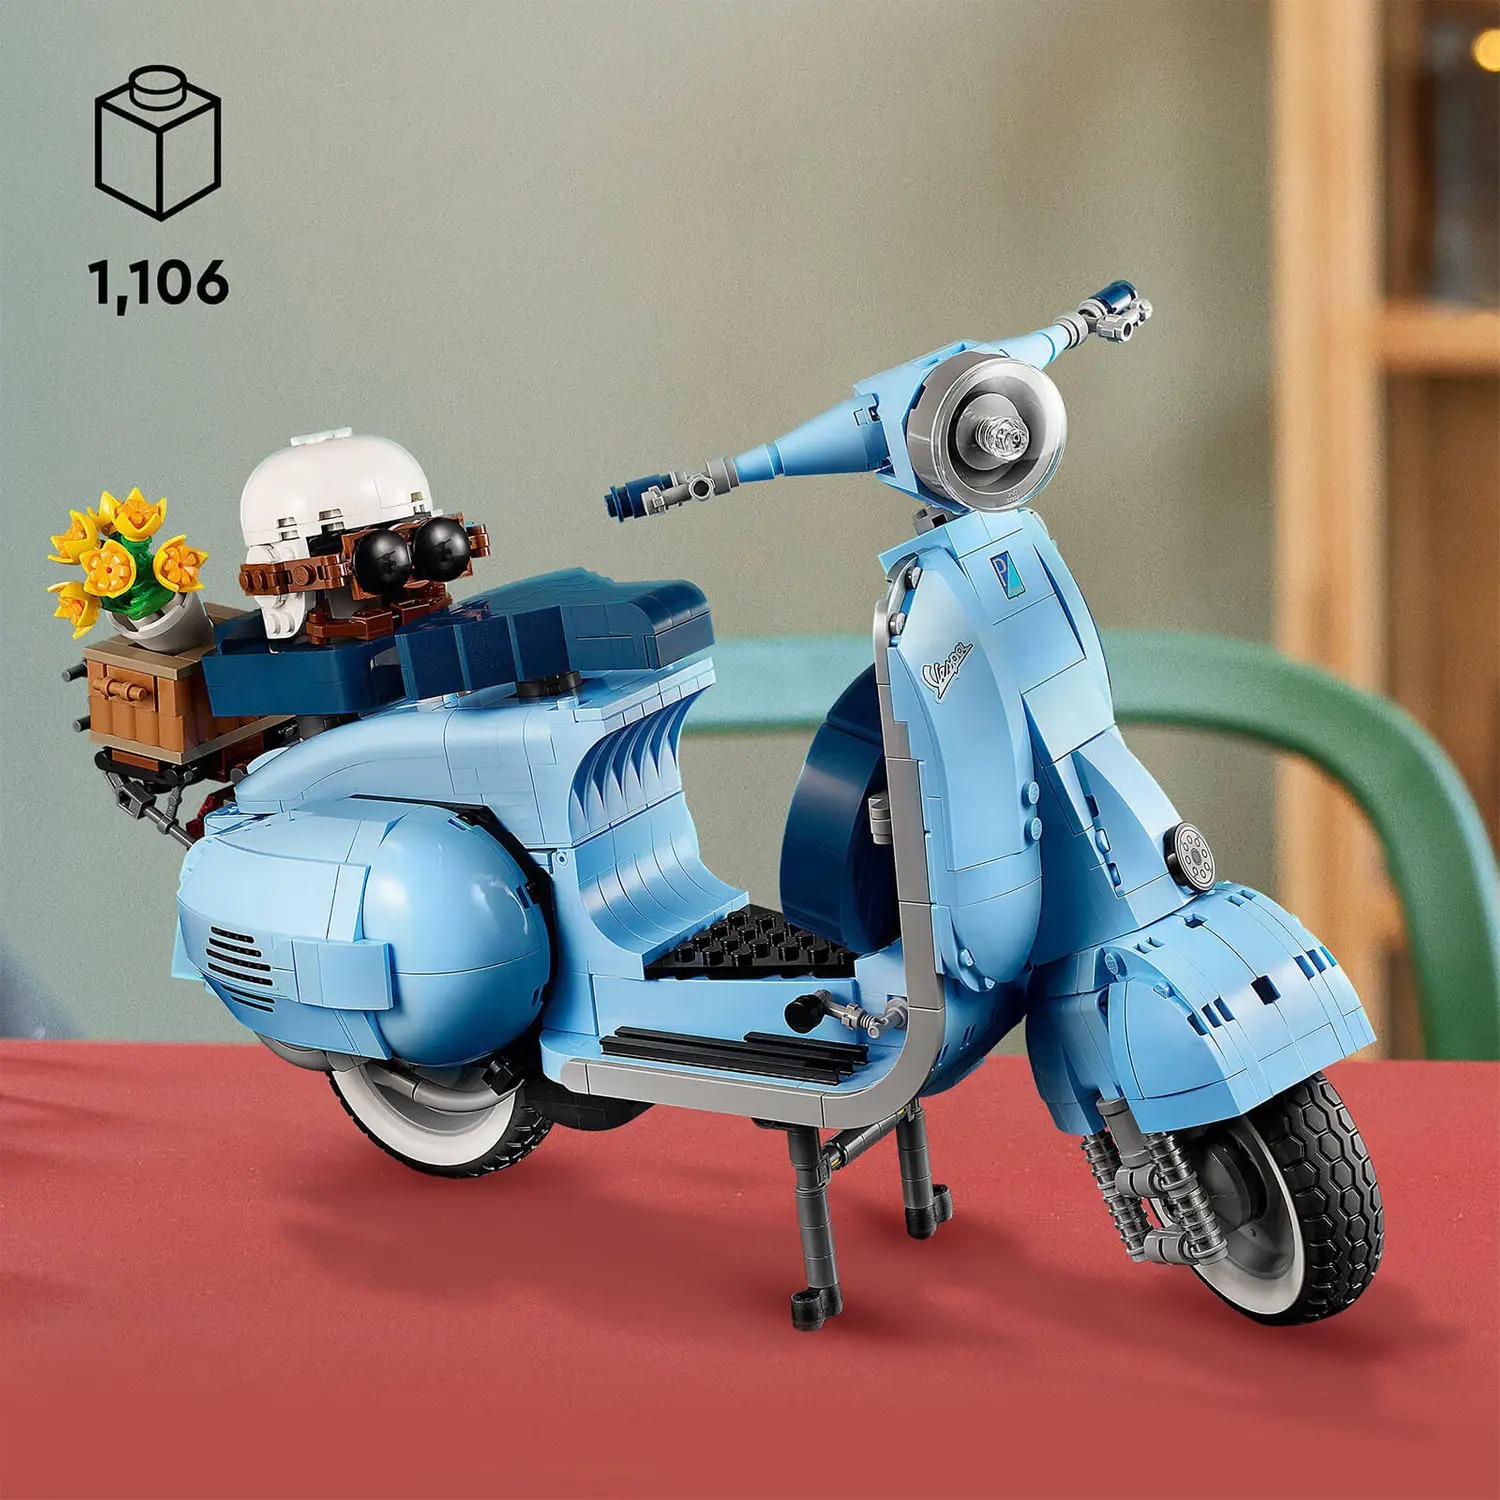 1106-PC LEGO Creator Expert Vespa Baby Blue Collectible Set (10298) $89.99 + Free Shipping